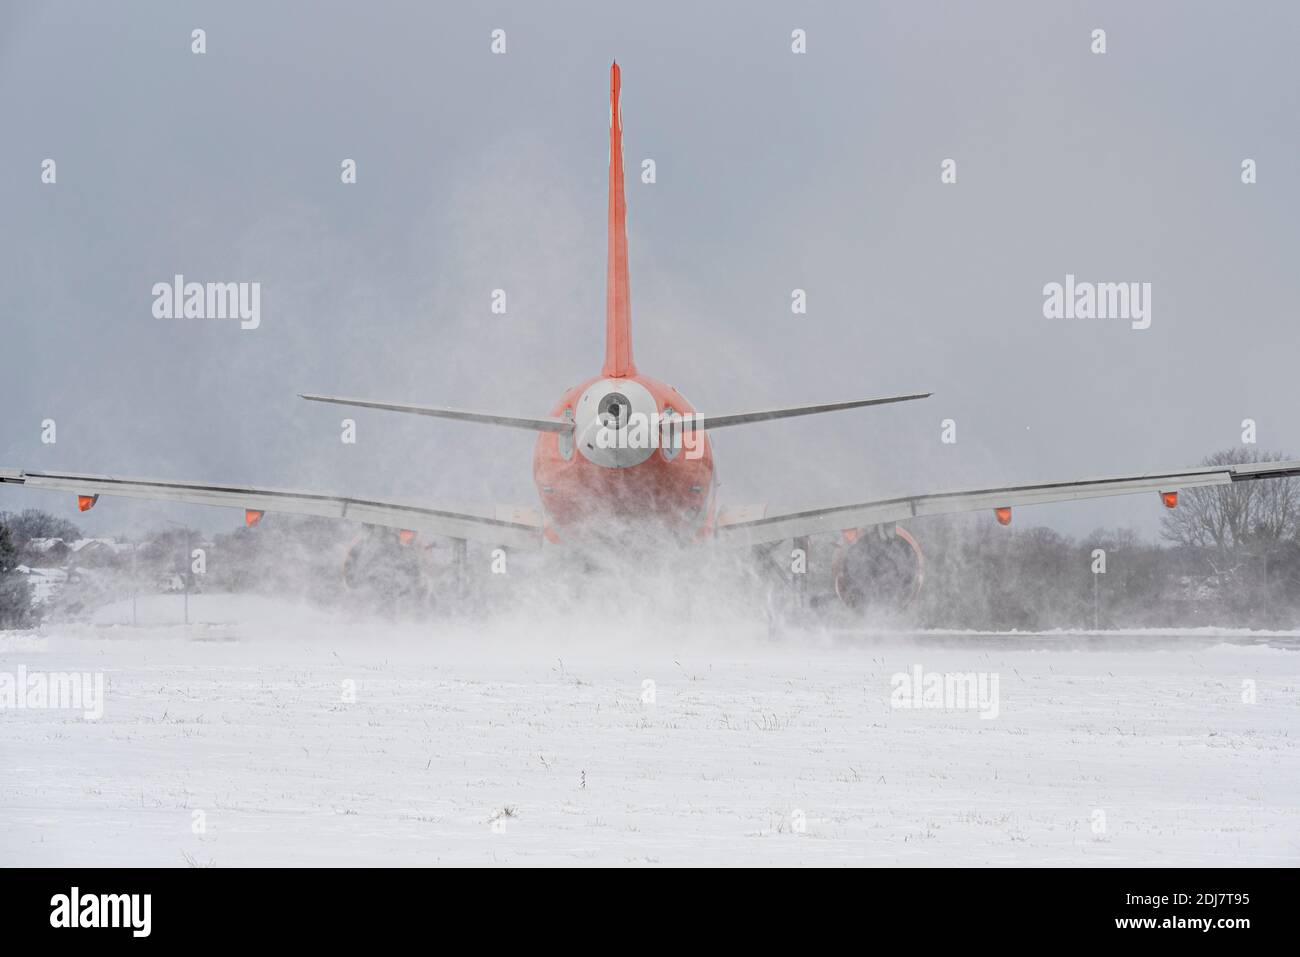 Snow covered London Southend Airport, Essex, UK, with an easyJet jet airliner plane taxiing out for take off surrounded by snow. Jetwash kicking up Stock Photo